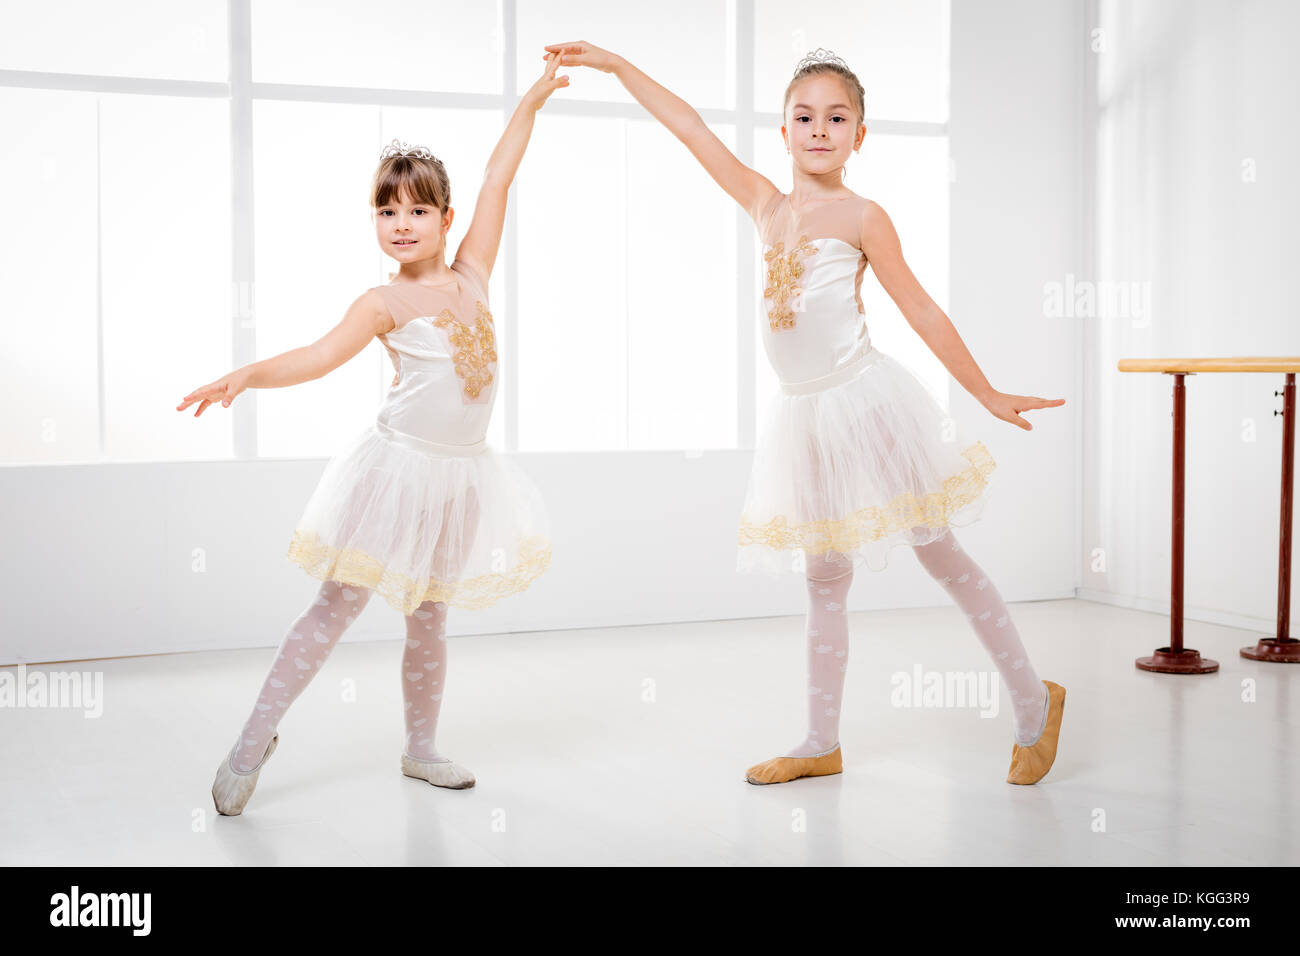 Little ballerina with hair in bunch posing to the camera. Young girl in  black costume, white tights and pointe shoes training in a ballet studio  Stock Photo